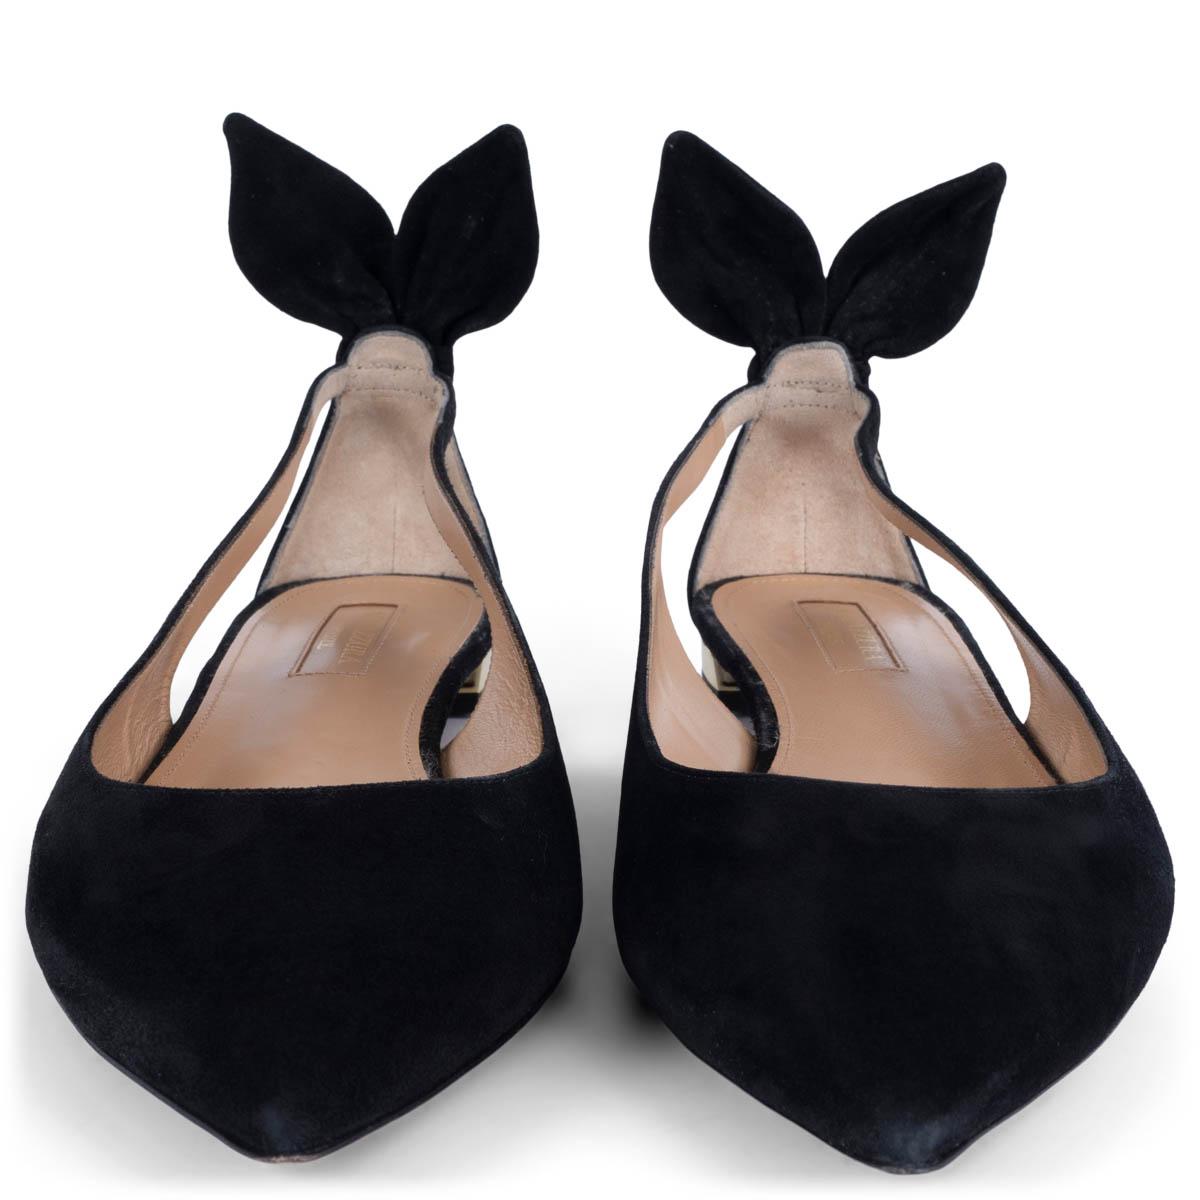 100% authentic Aquazzura Bow Tie ballet flats are crafted from soft black suede featuring polished golden heel, pointed-toe and cut-out detailing with tie-knots at the heel counter. Brand new.

Measurements
Imprinted Size	39.5
Shoe Size	39.5
Inside